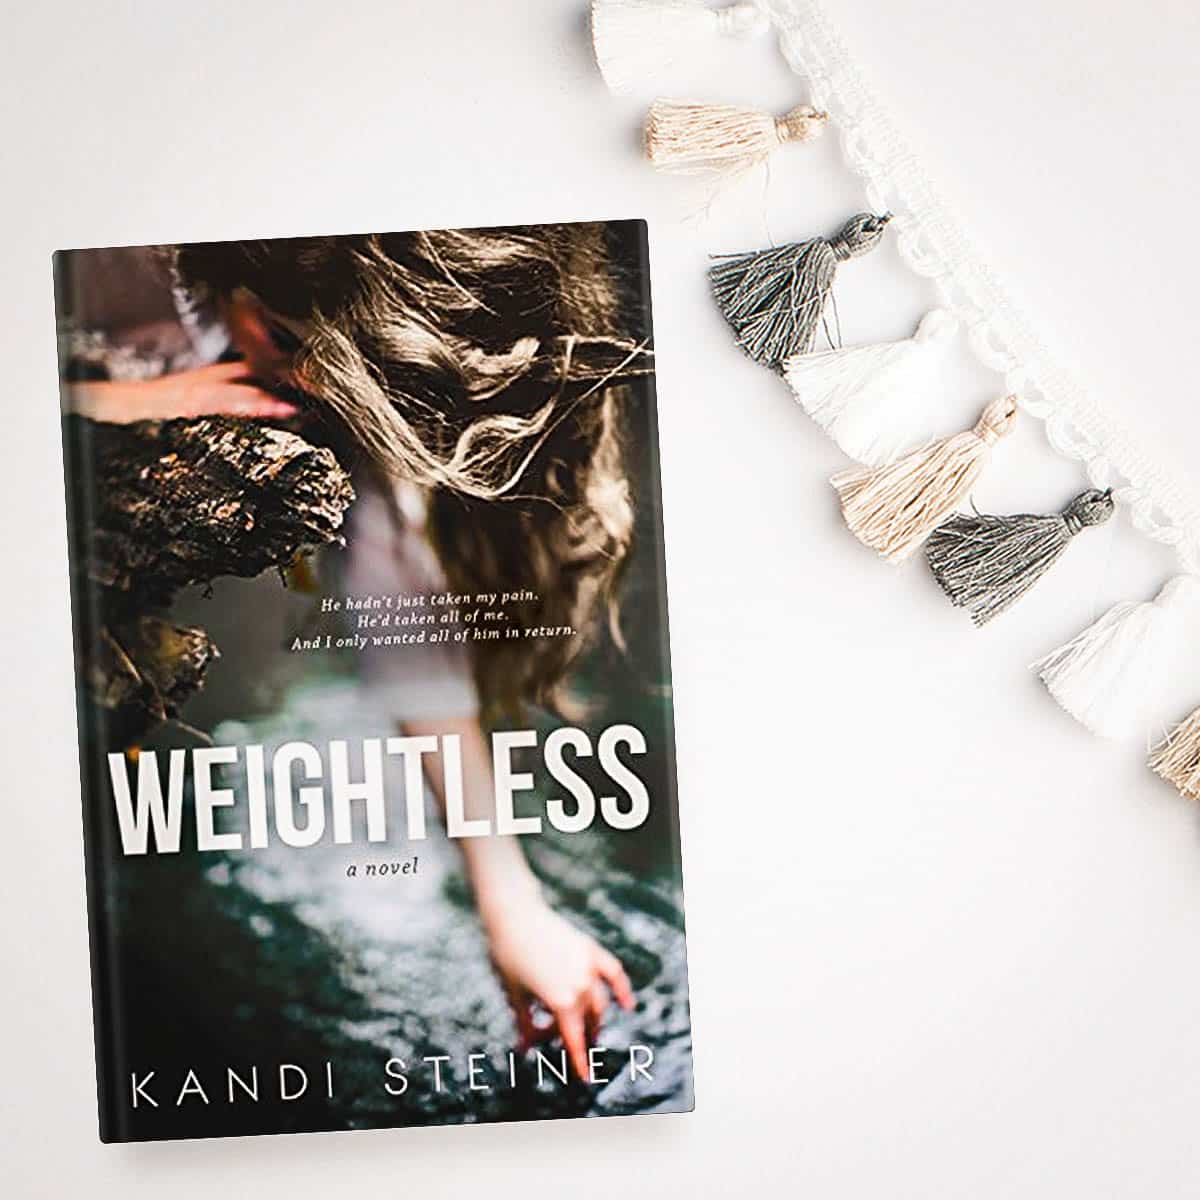 Weightless by Kandi Steiner – Raw and Emotional New Adult Romance